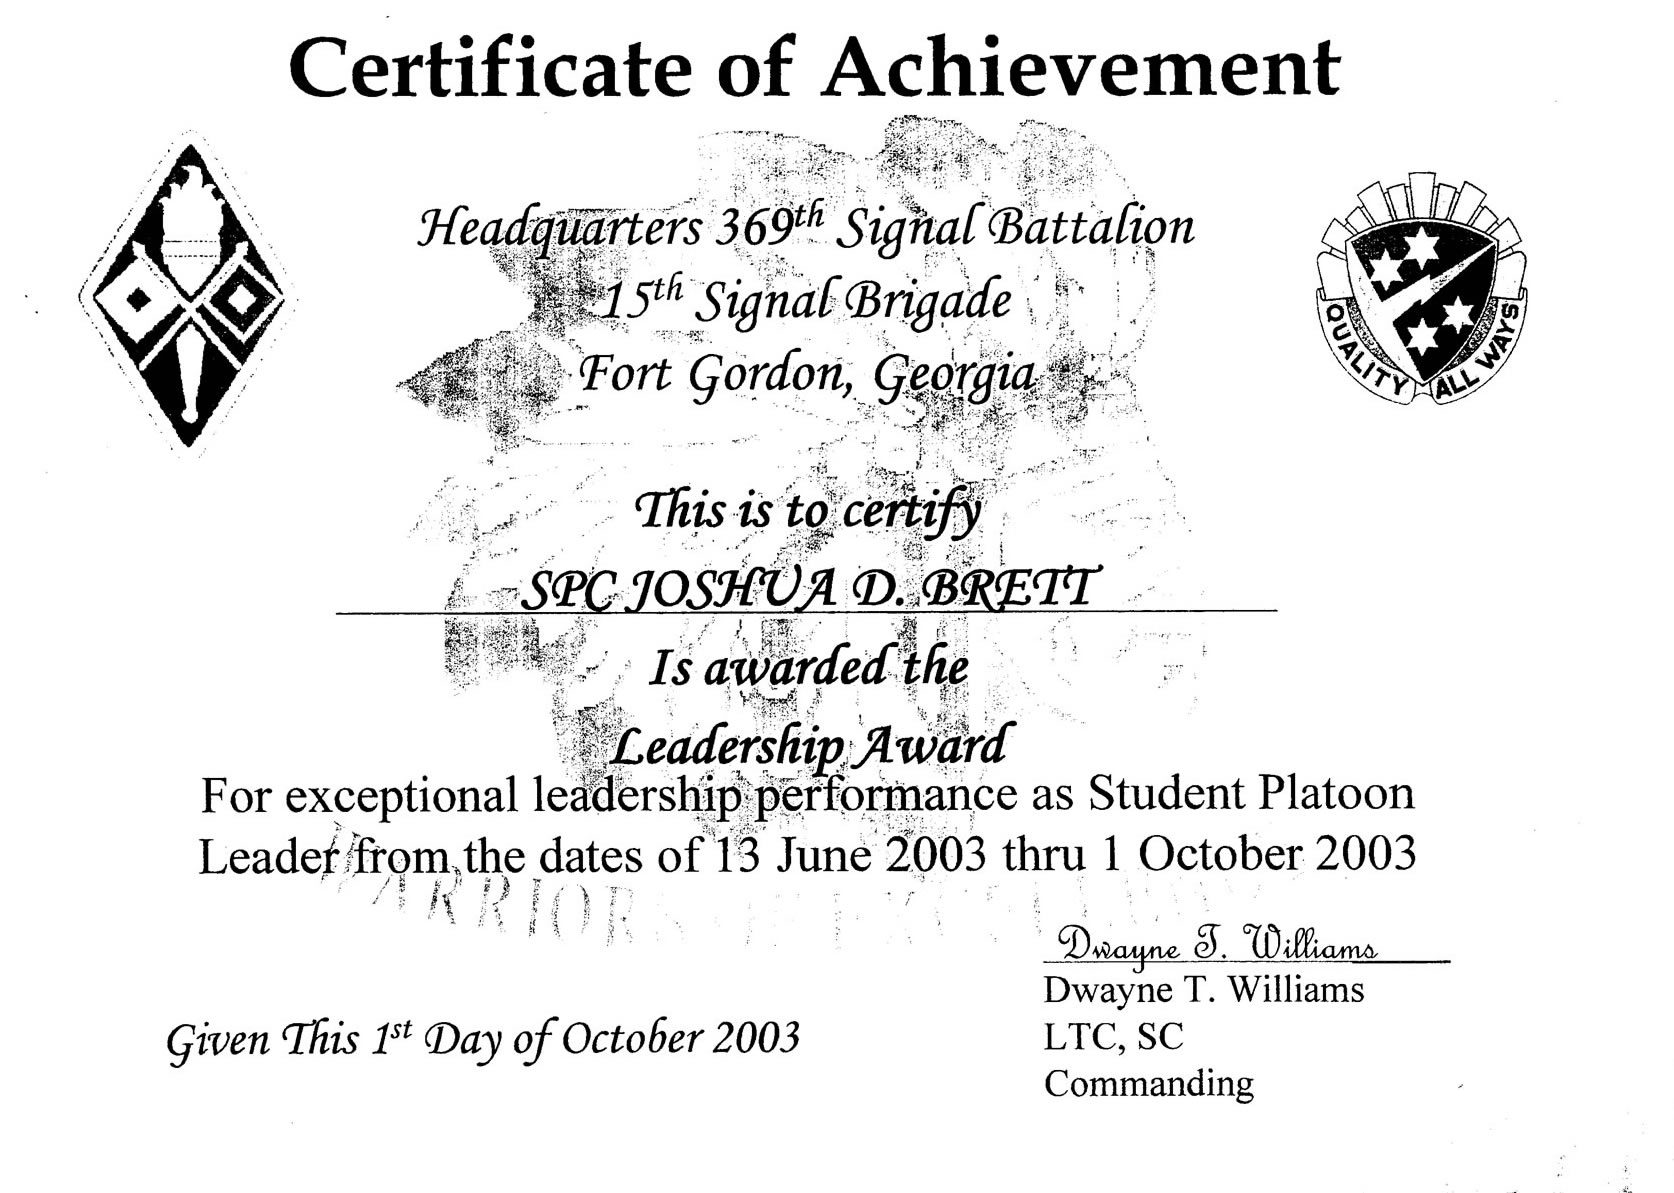 Army Certificate of Achievement 4